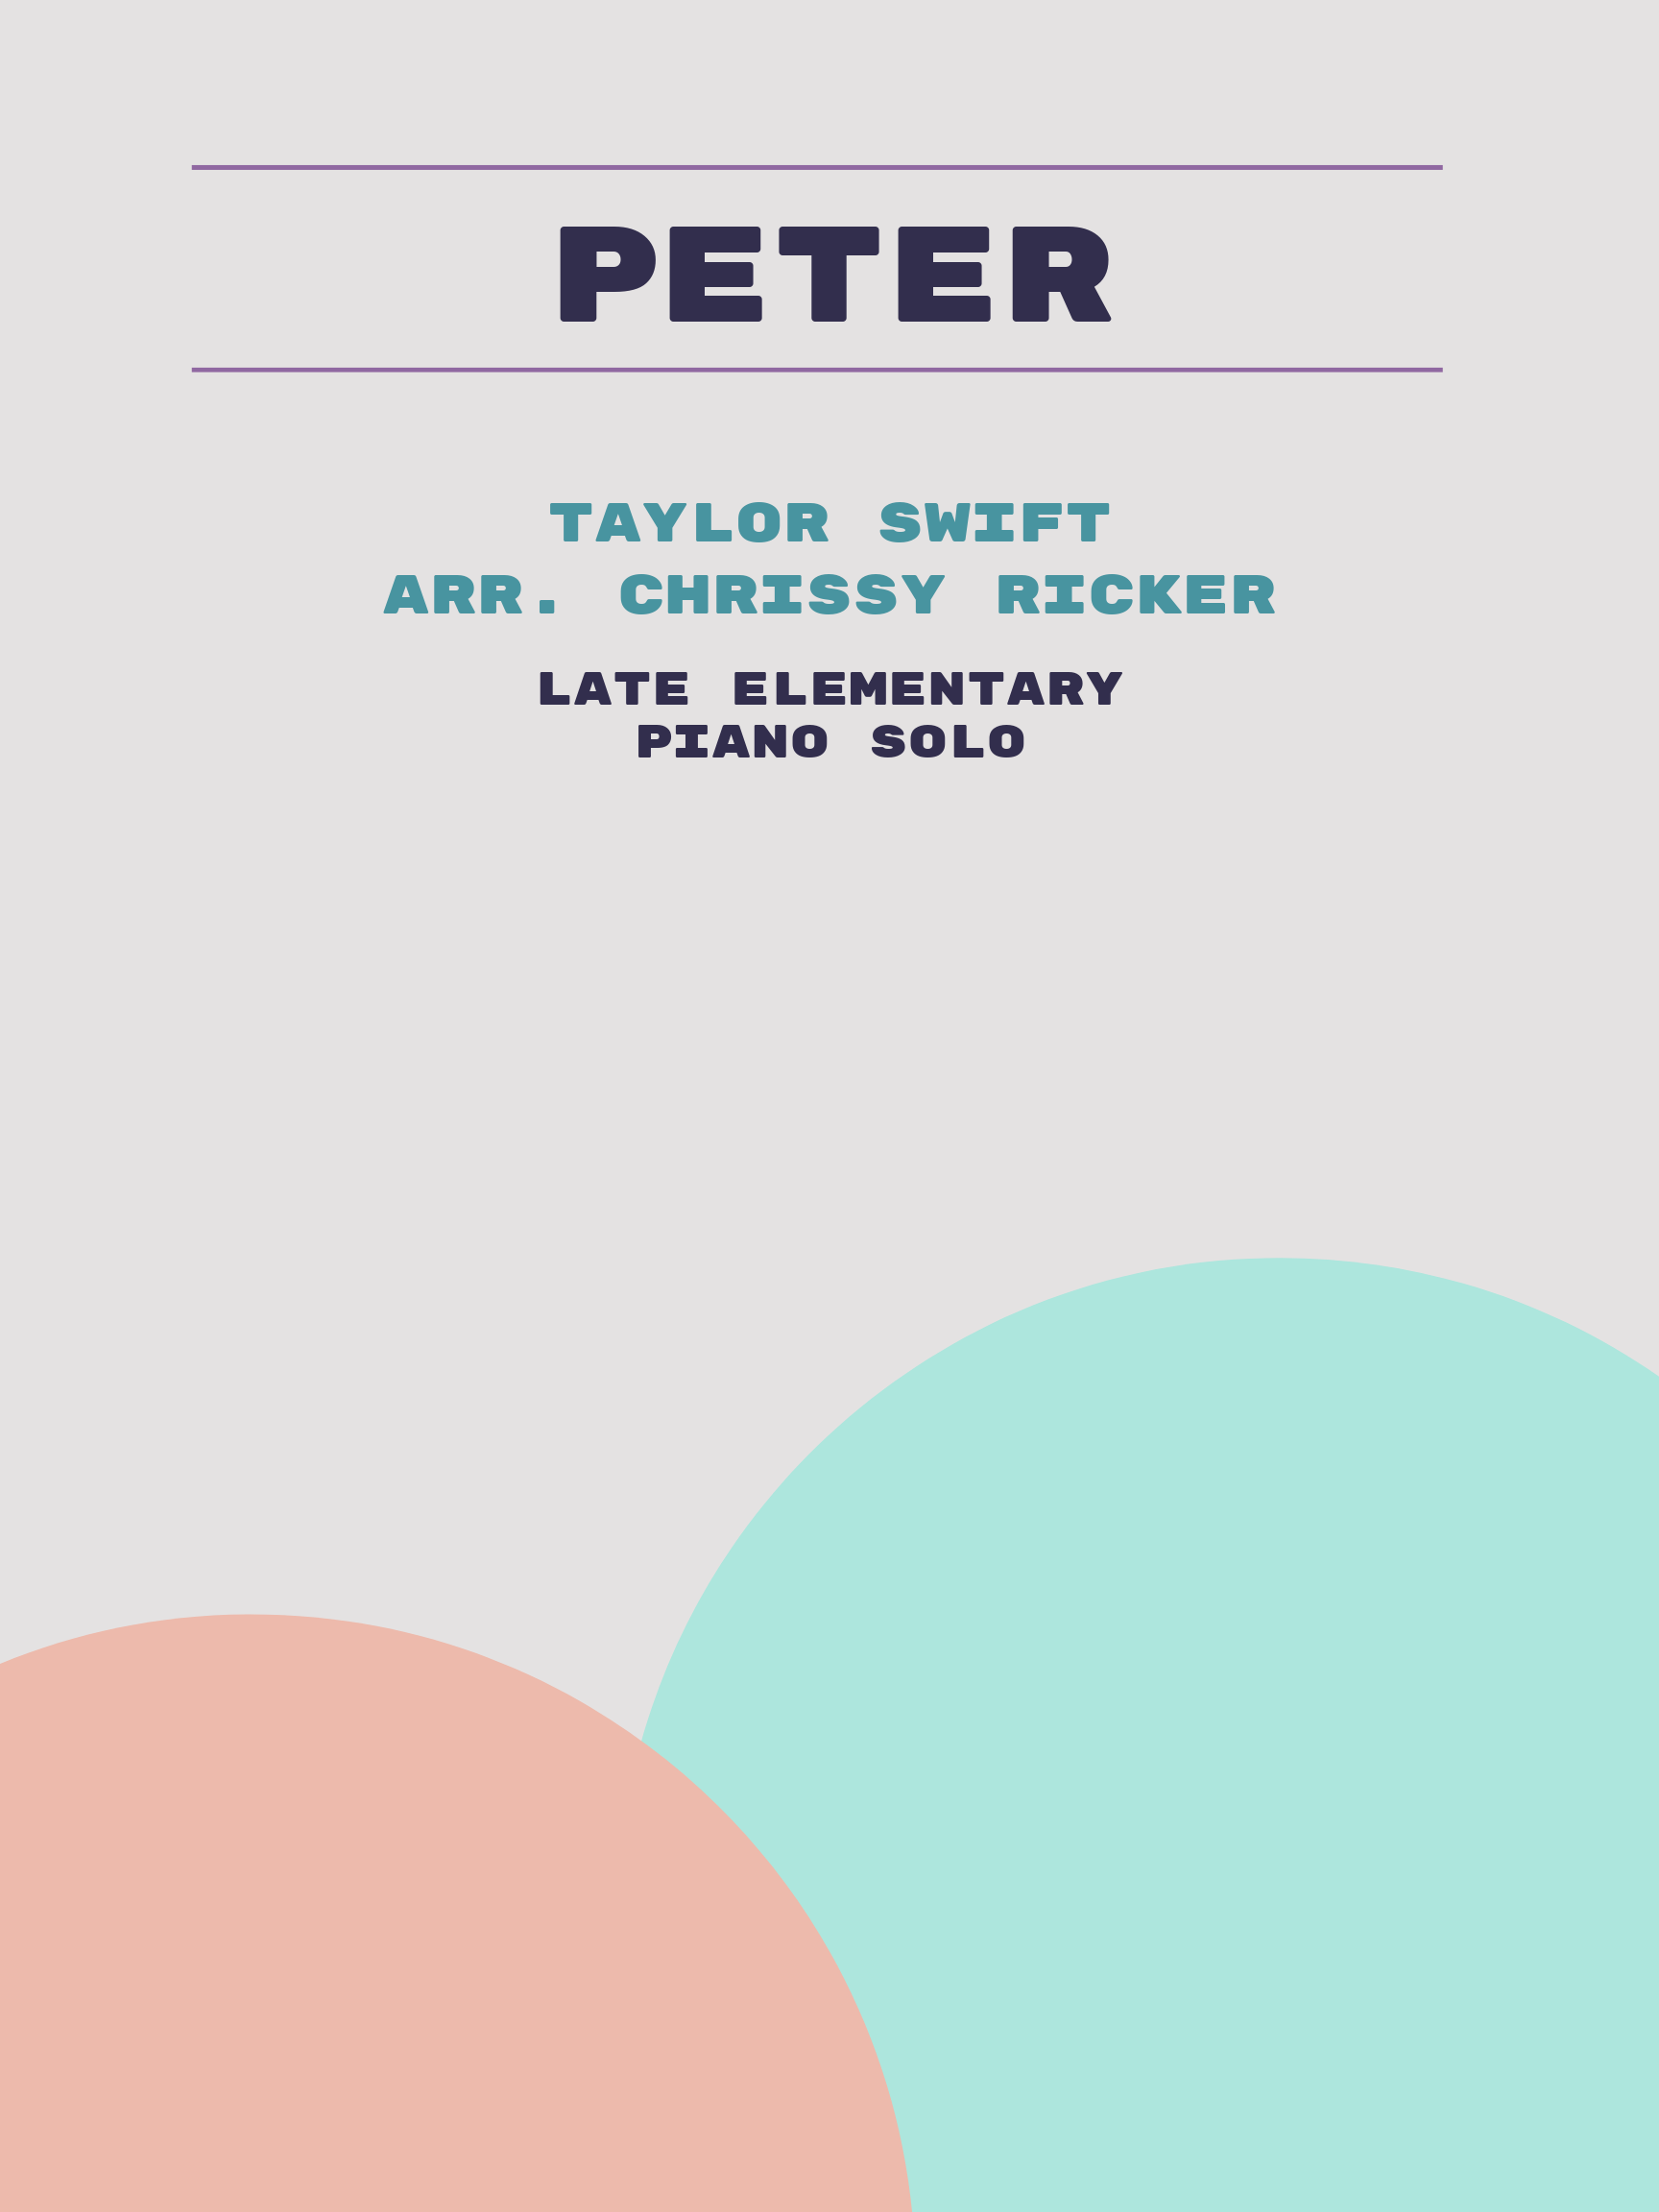 Peter by Taylor Swift